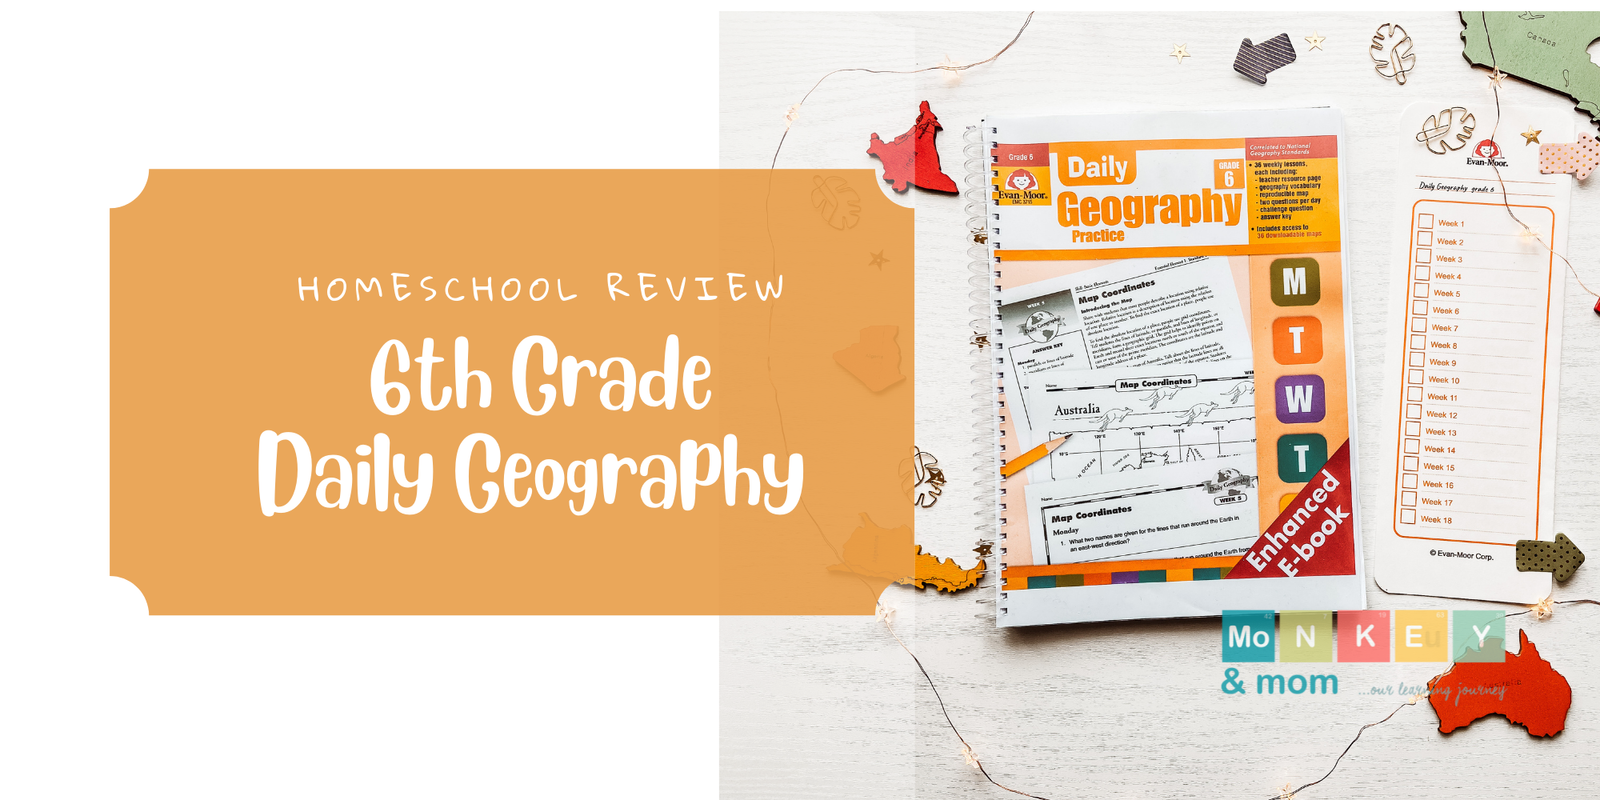 Daily Geography 6 review monkeyandmom homeschooling